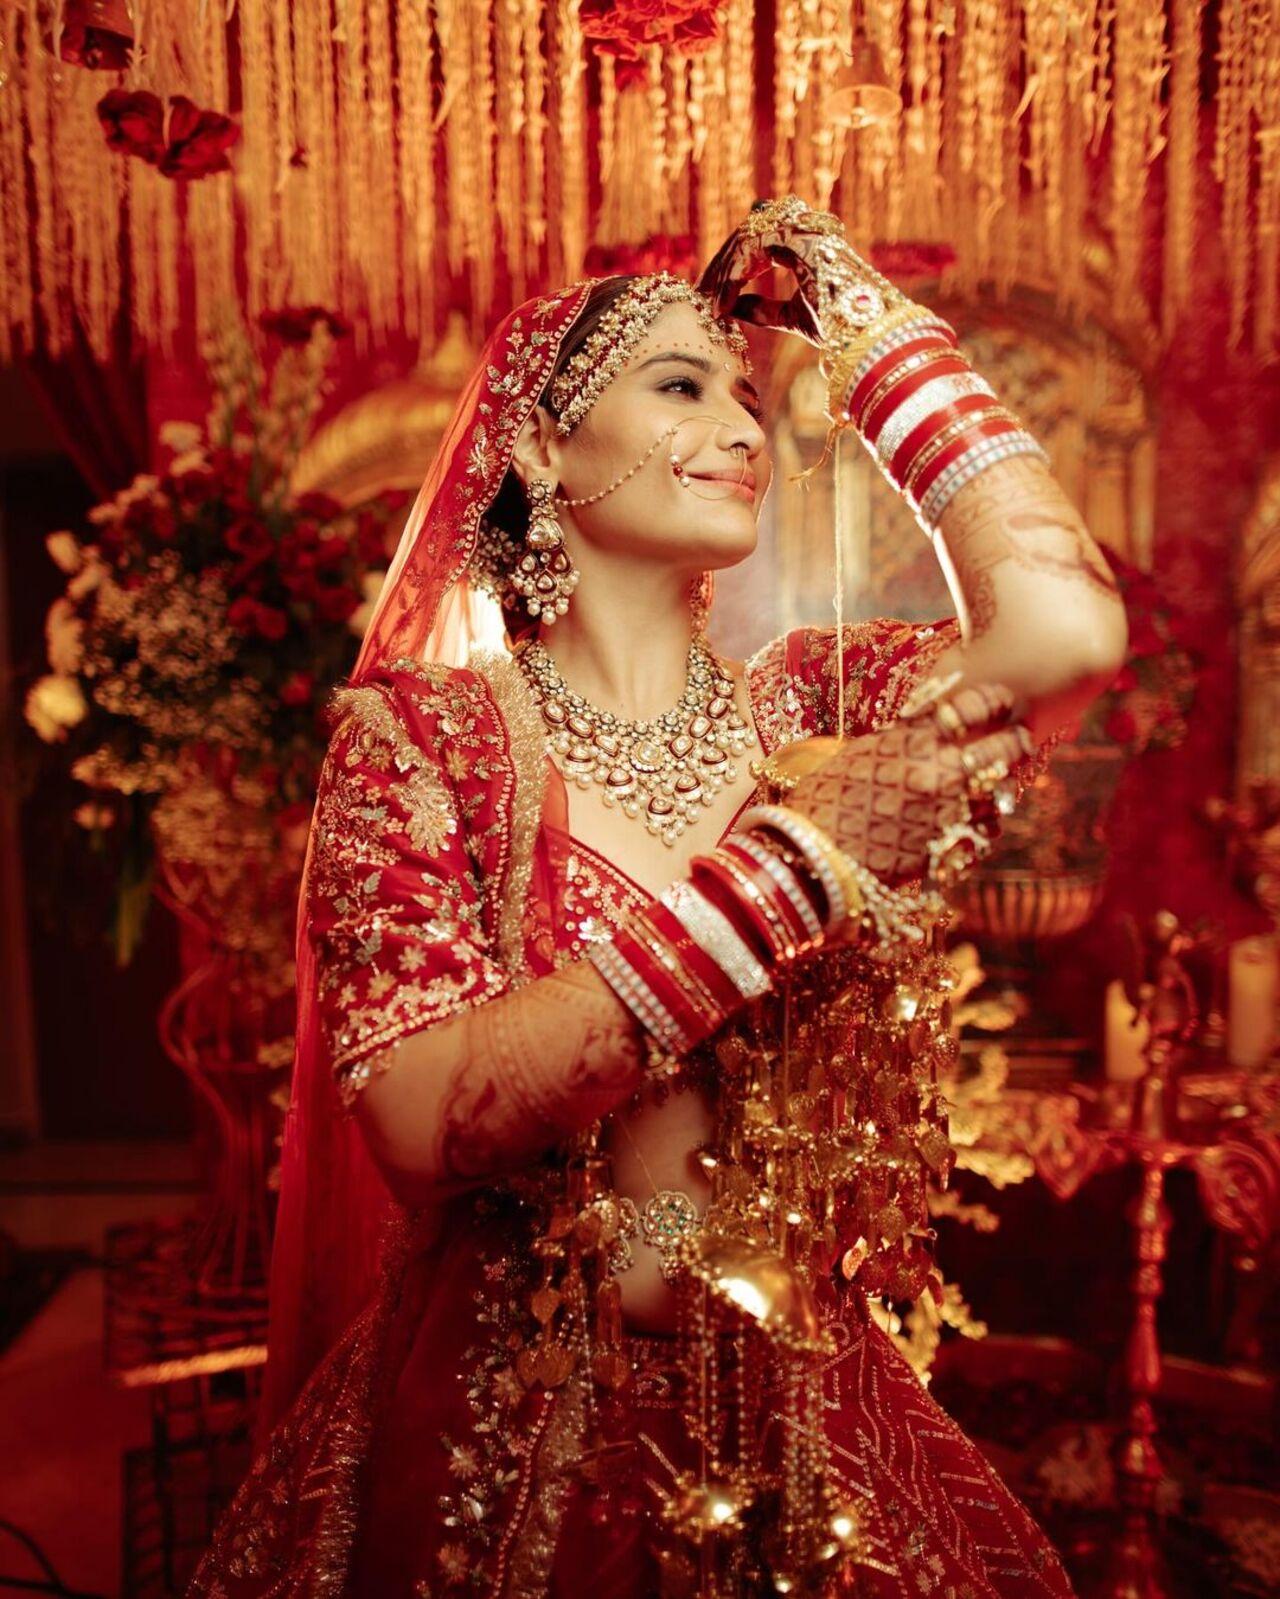 Arti opted for a very traditional red lehenga look for her big day and wore her lehenga with a long veil